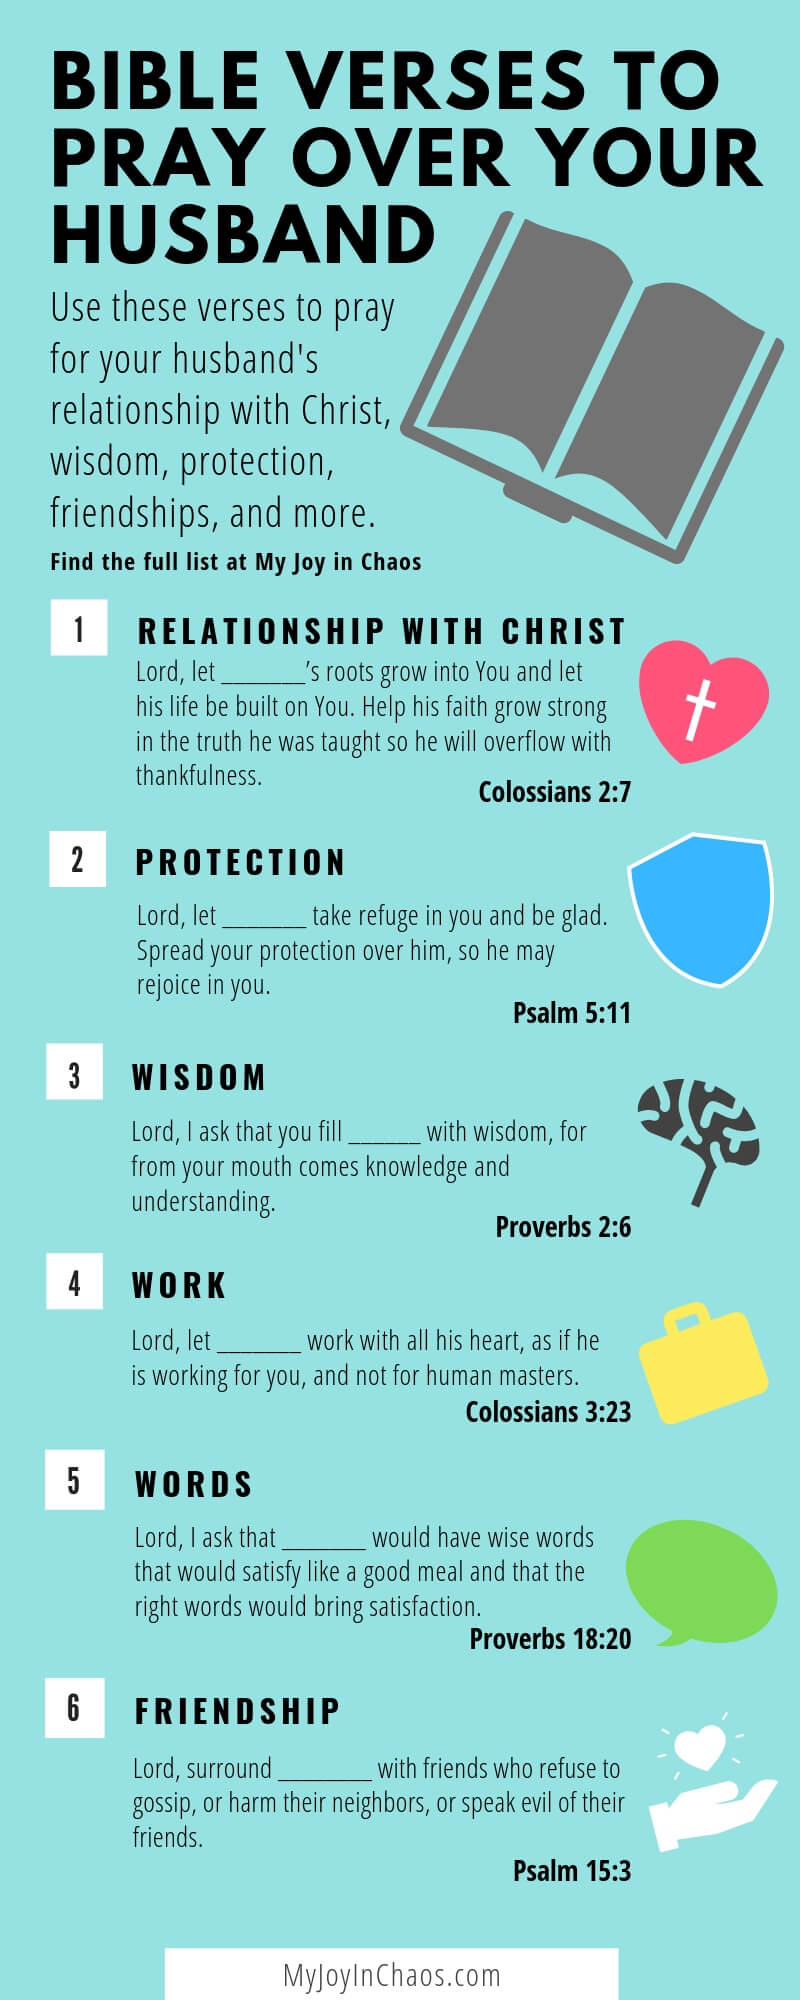  pray over your husband infographic 